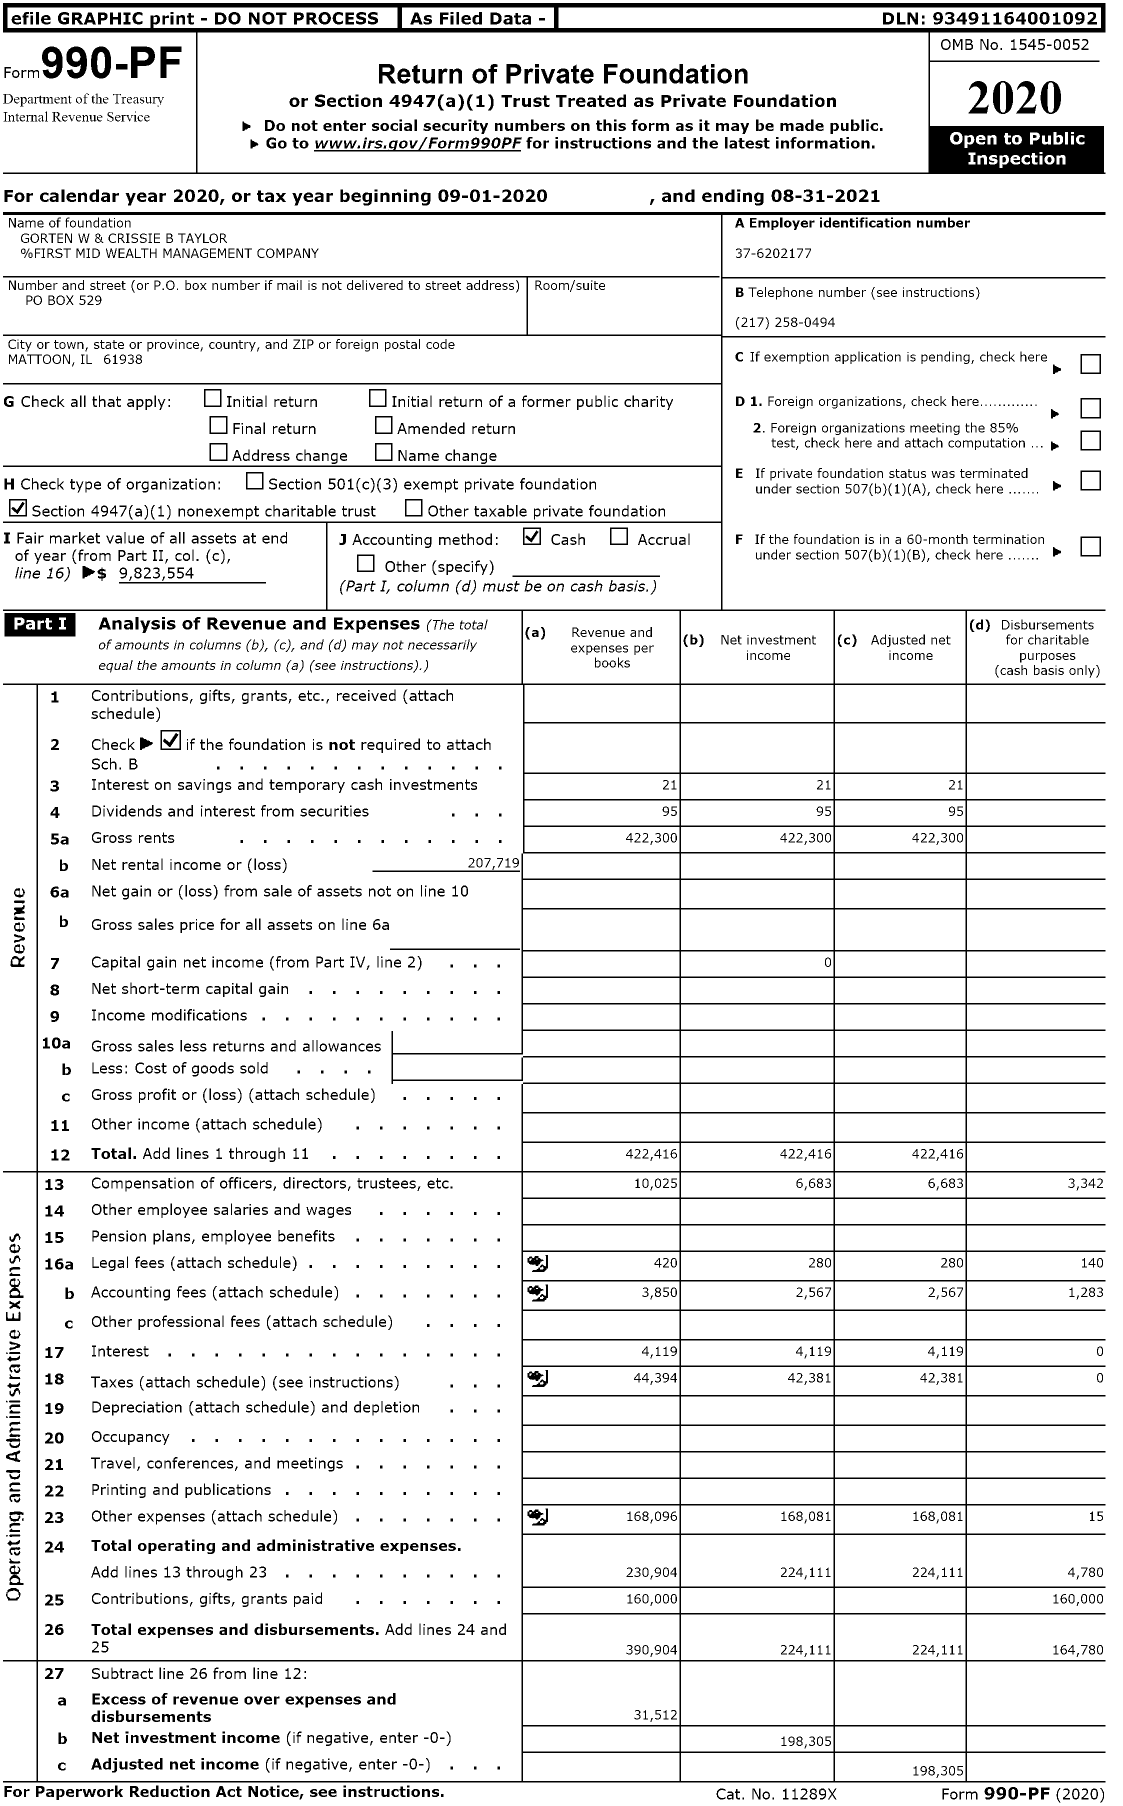 Image of first page of 2020 Form 990PF for Gorten W and Crissie B Taylor %first Mid Wealth Management Company